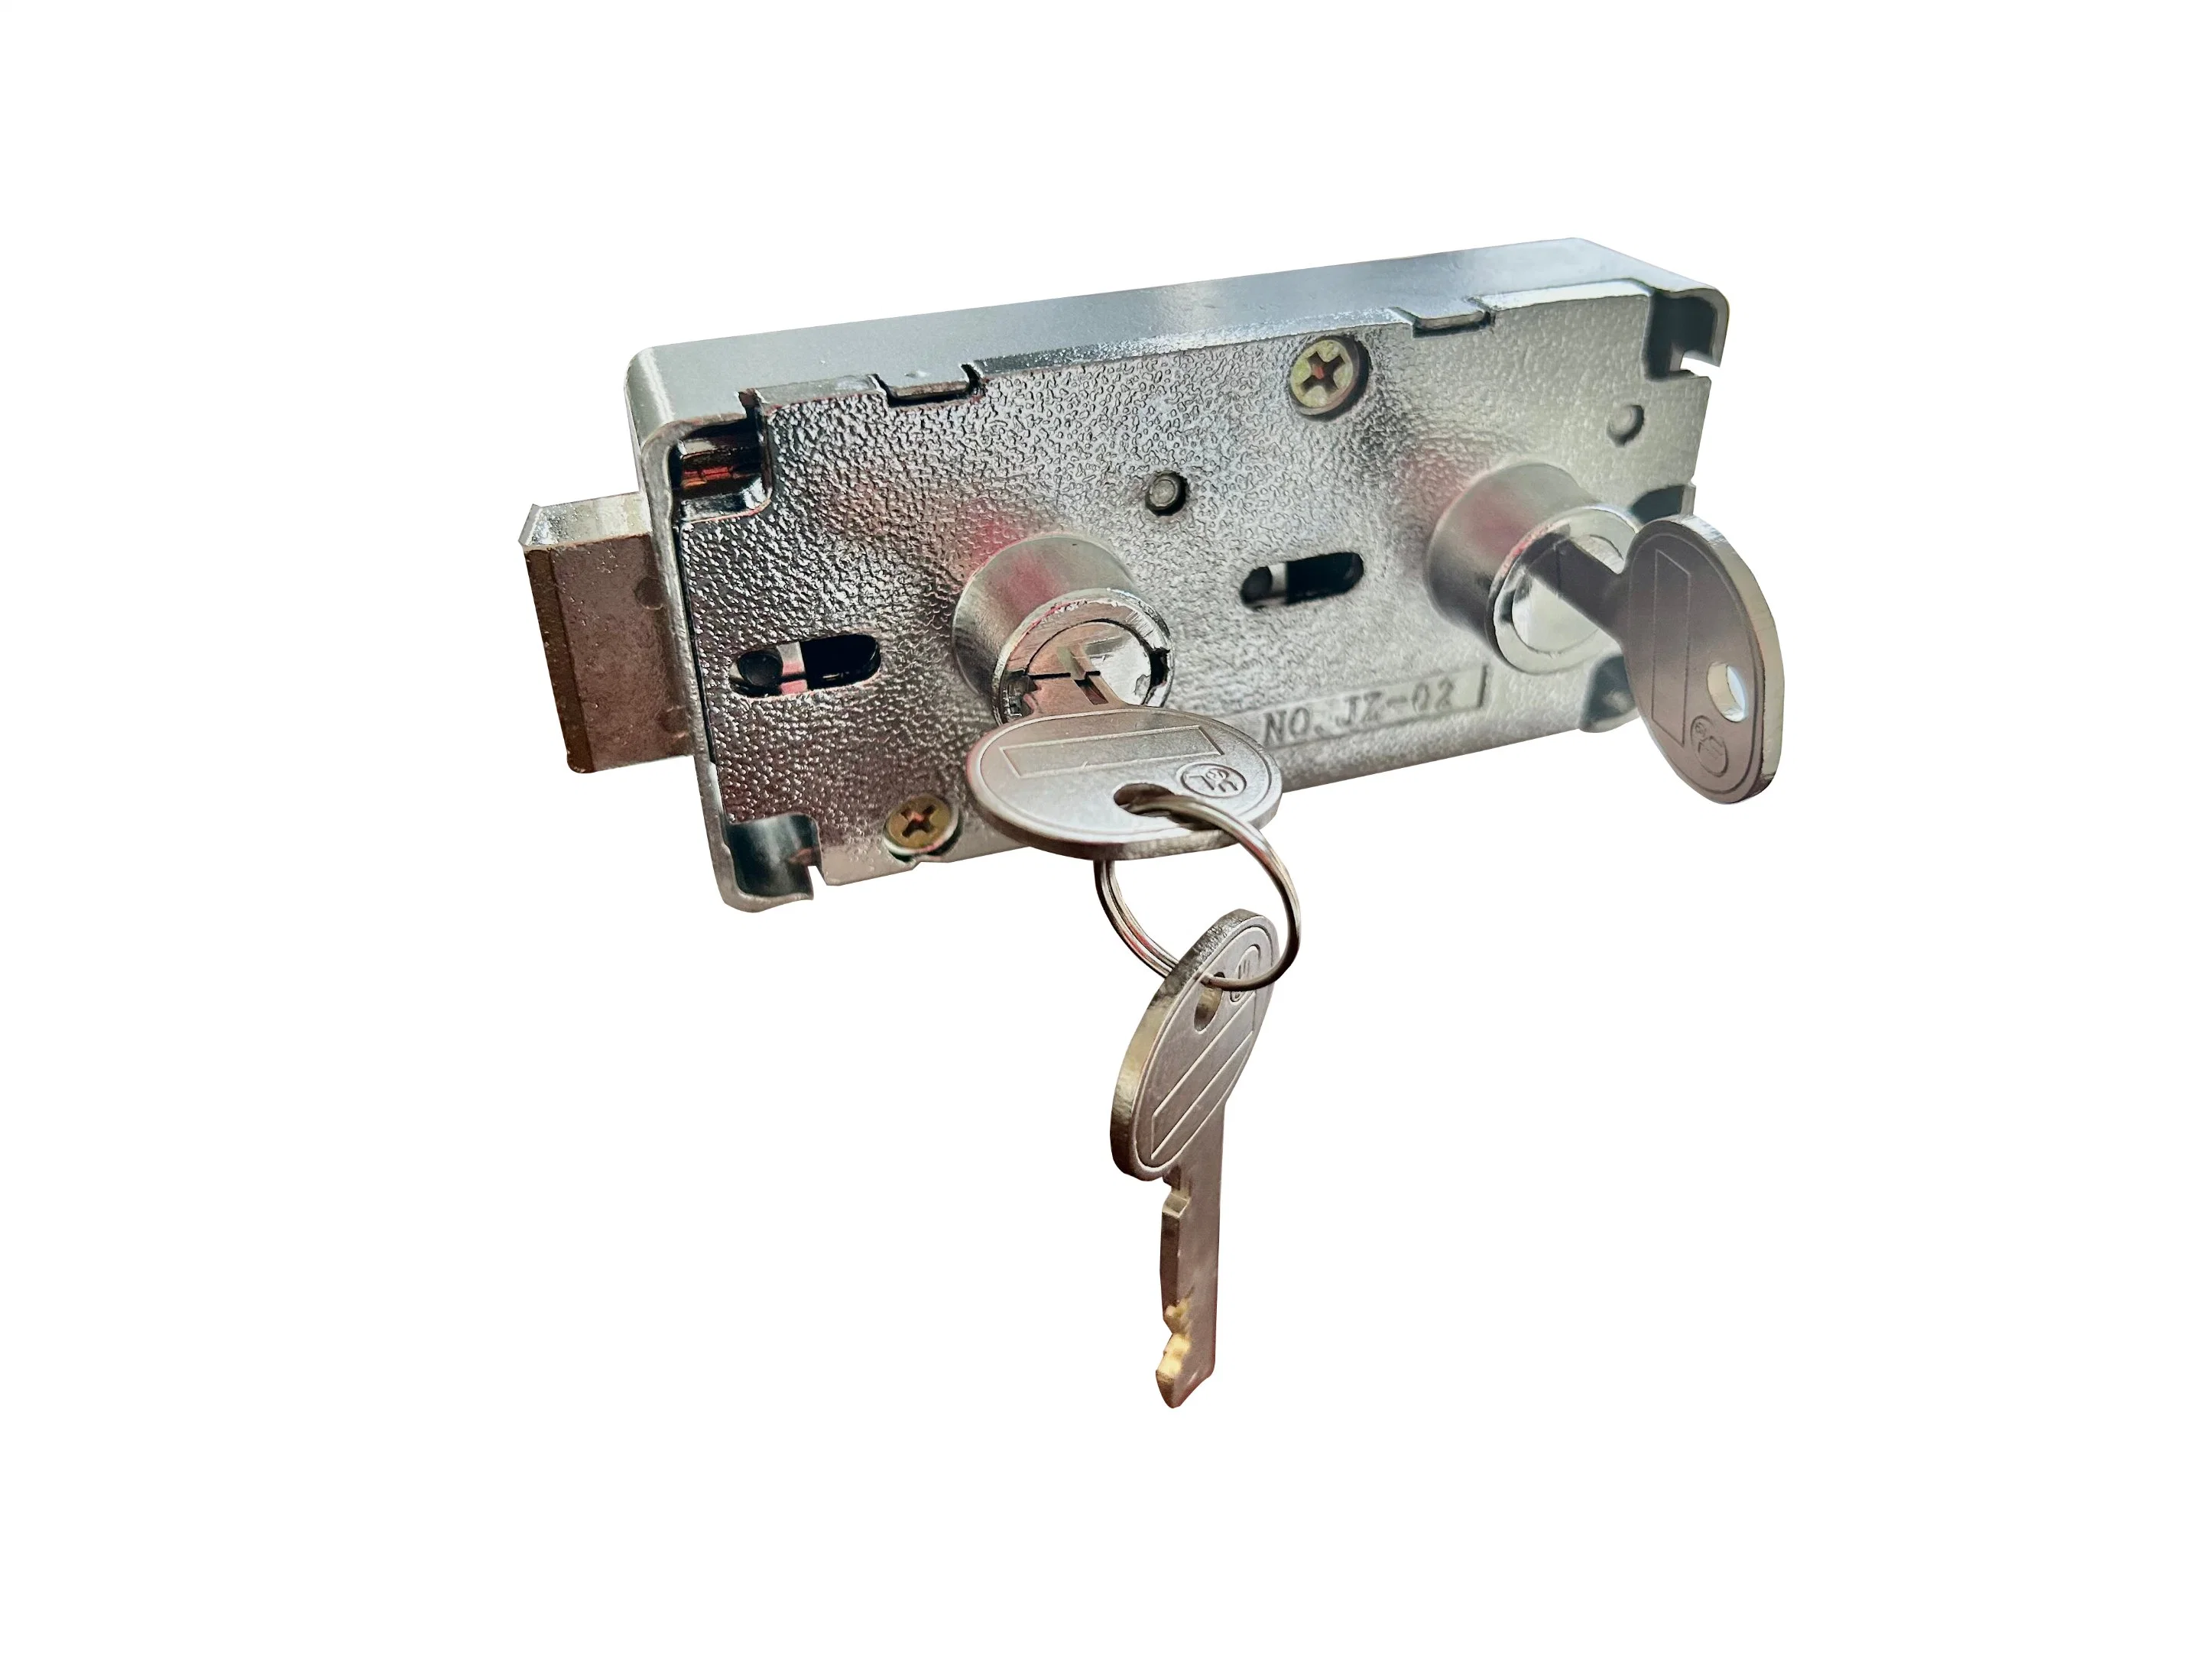 Jz-02 Dual Key Lock for Safe Deposit Box Security Lock with Guard Key and Client Key